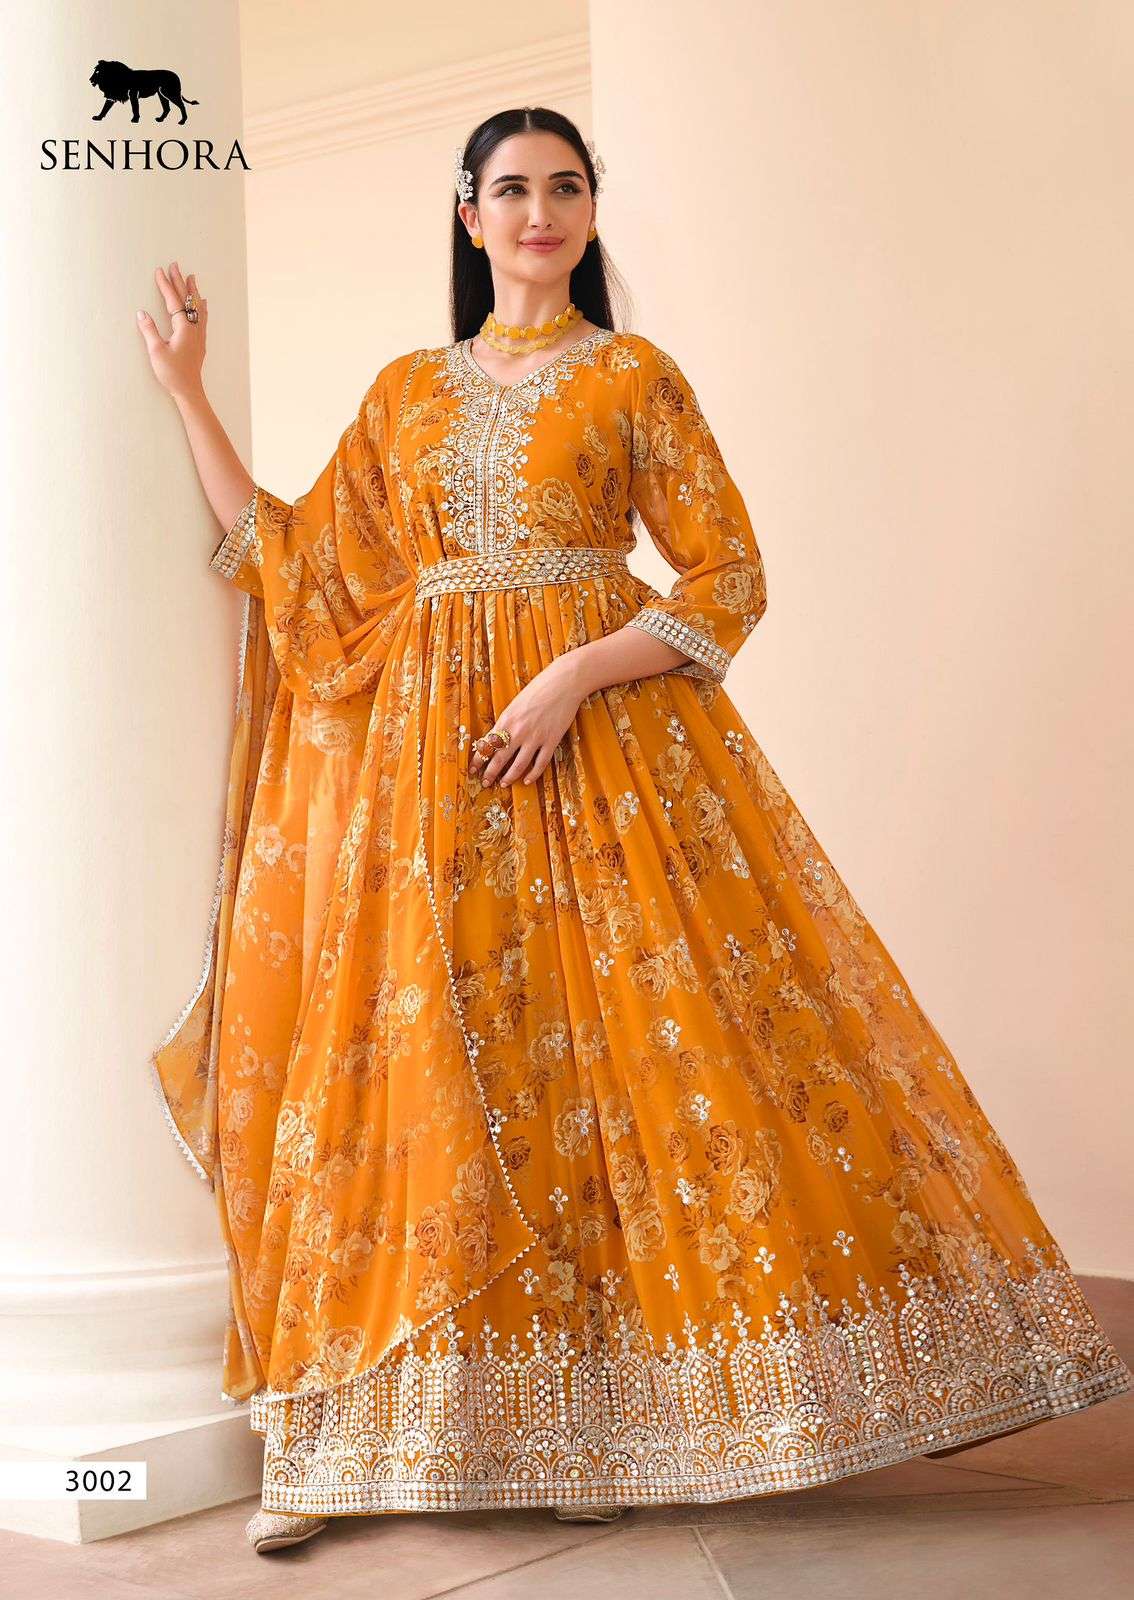 senhora dresses official catalogue kesha series 3002 to 3005 floral printed georgette anarkali gown with waist stylish belt anarkali gown with full flair readymade indian attire 